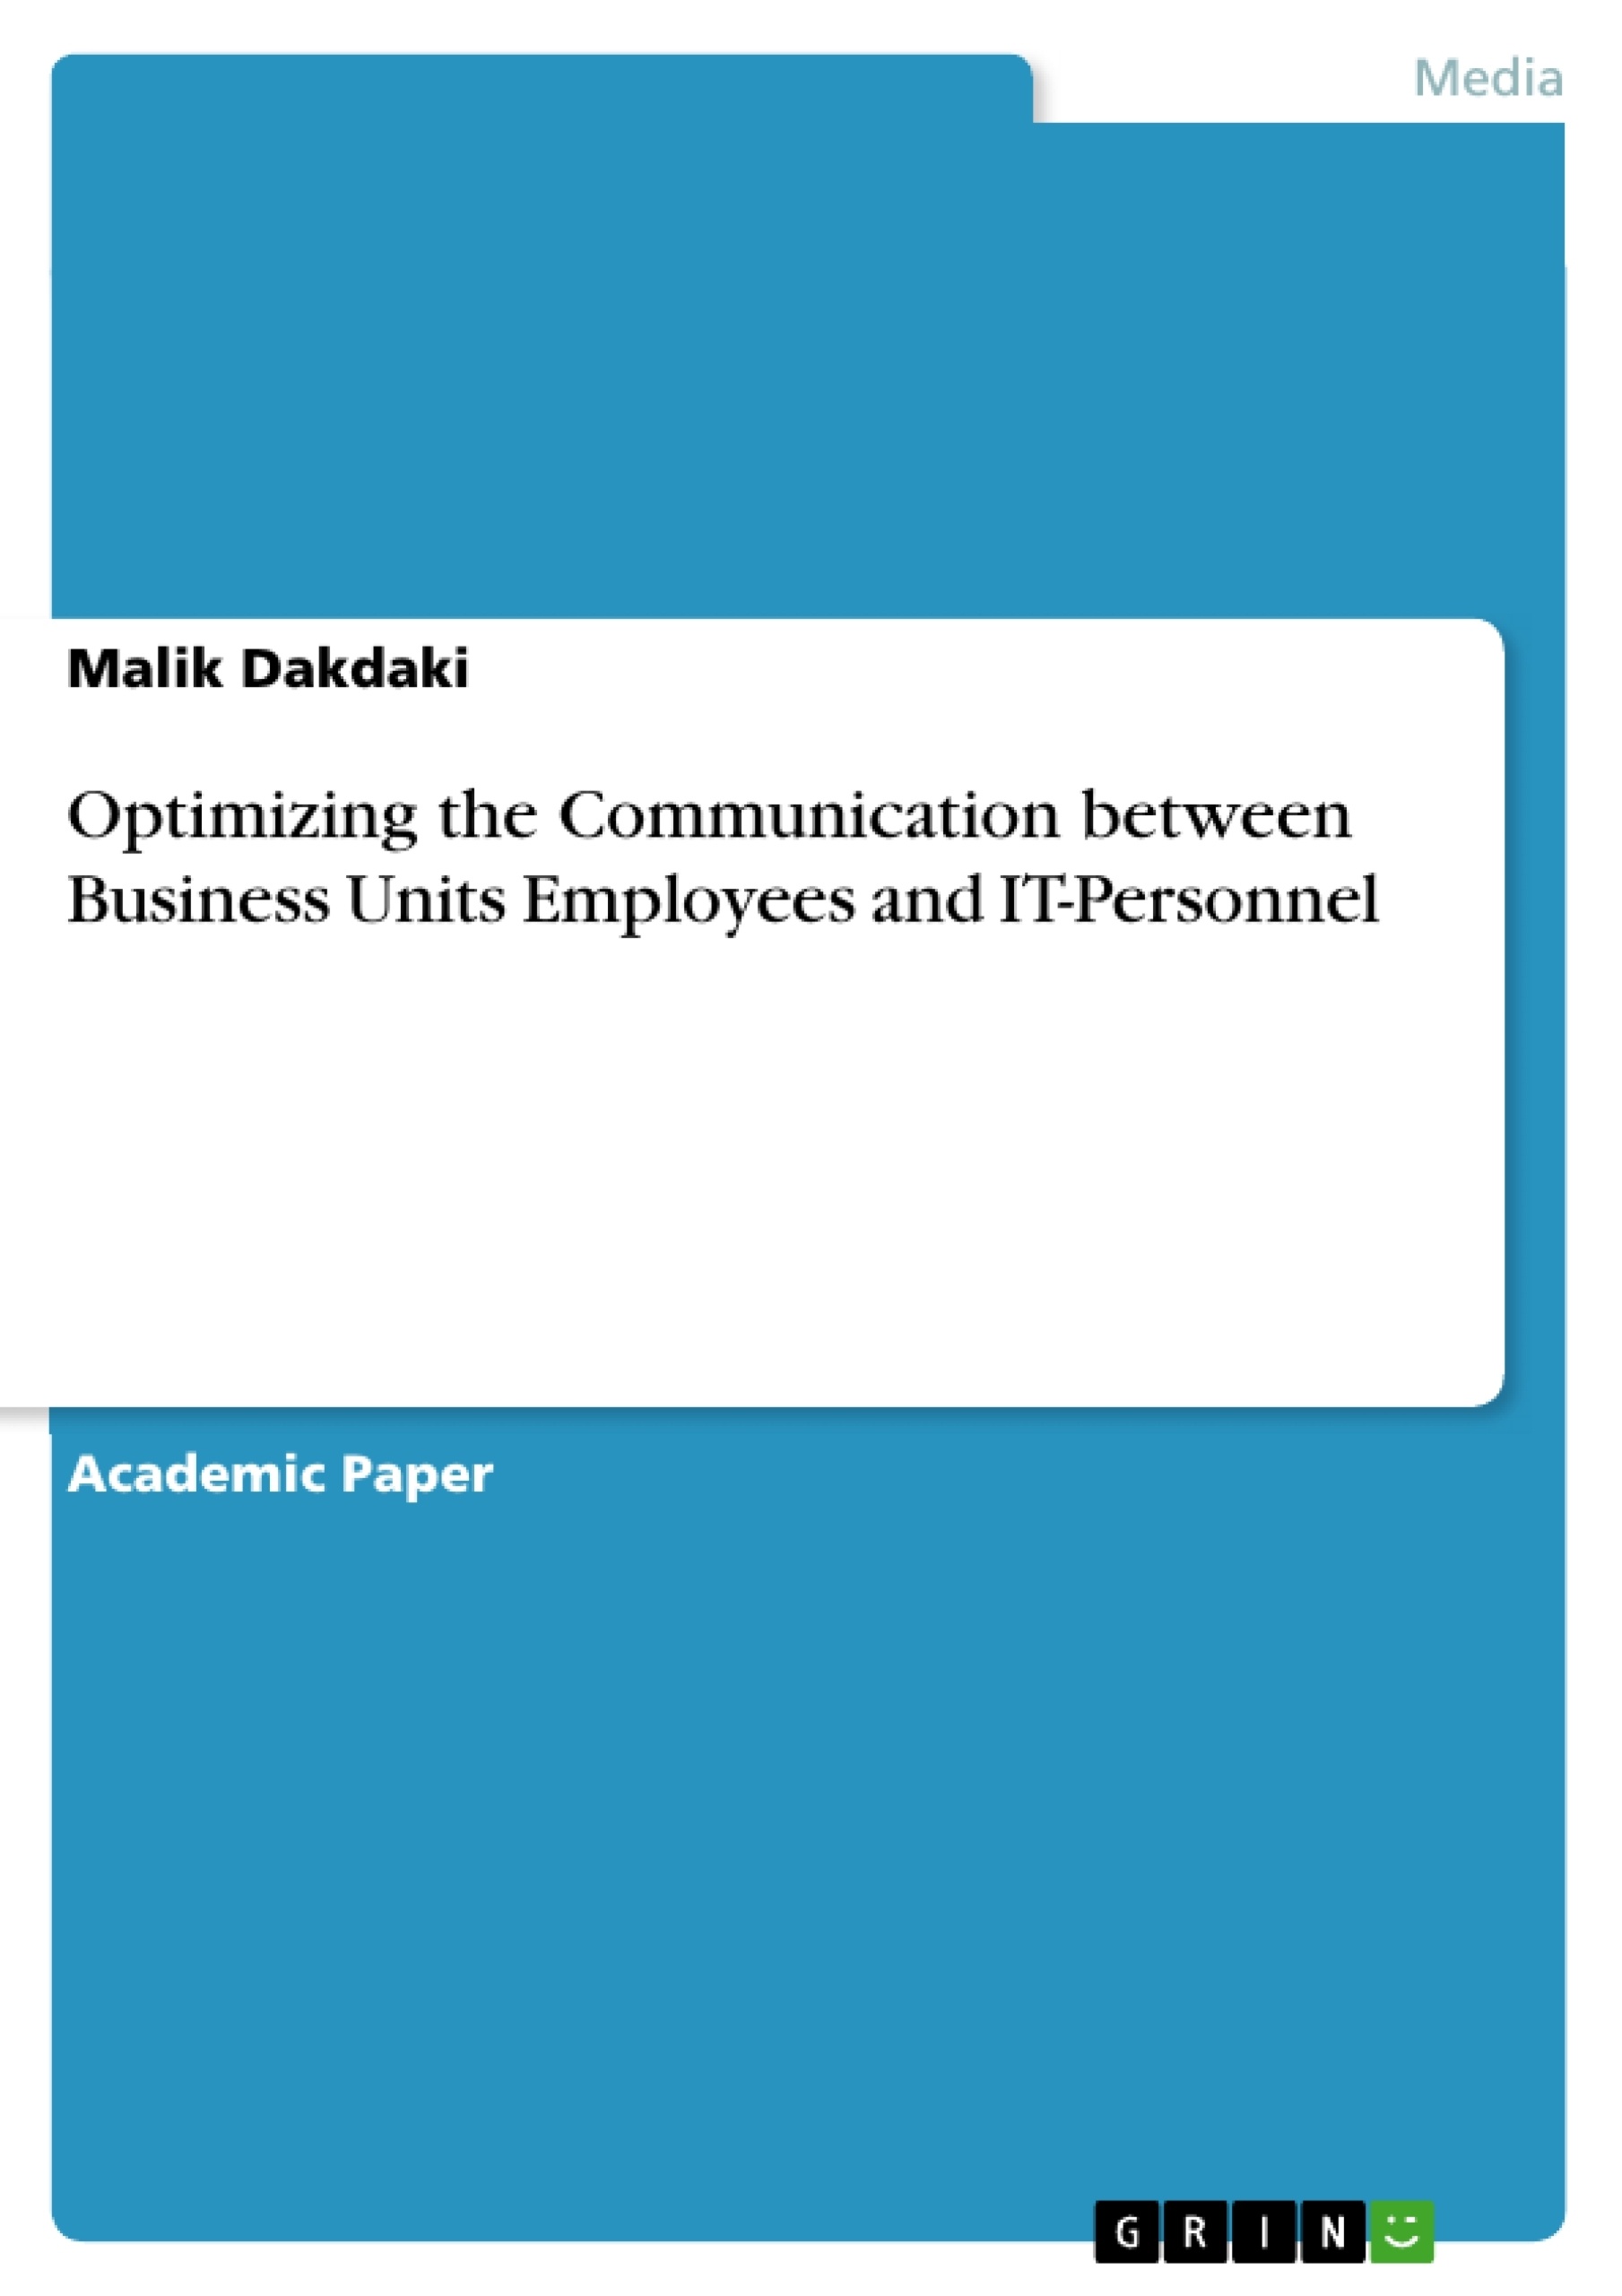 Title: Optimizing the Communication between Business Units Employees and IT-Personnel